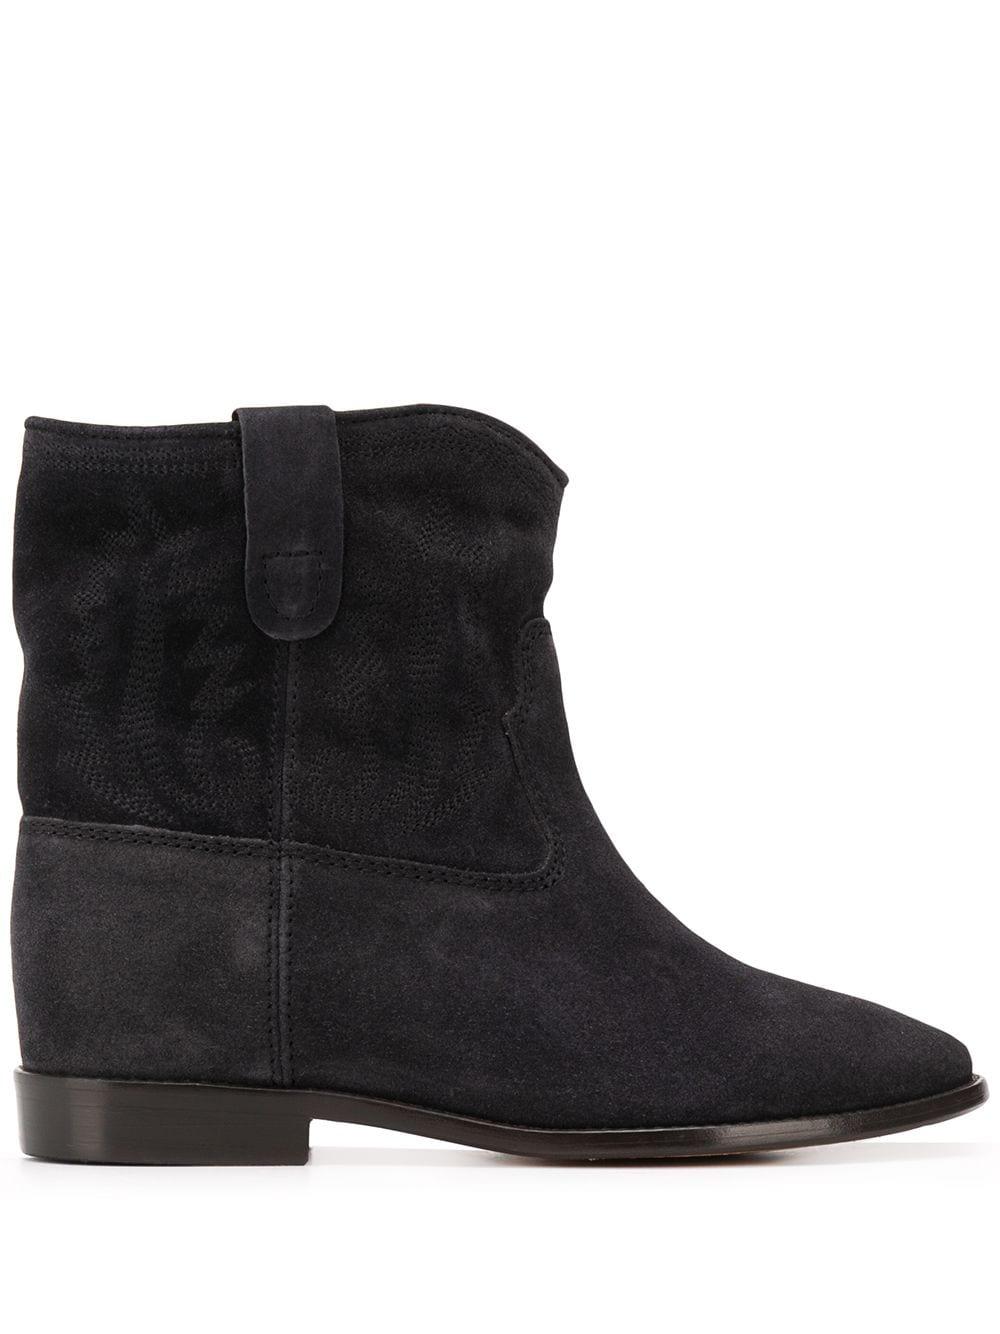 Isabel Marant Leather Crisi Embroidered Ankle Boots in Black - Lyst